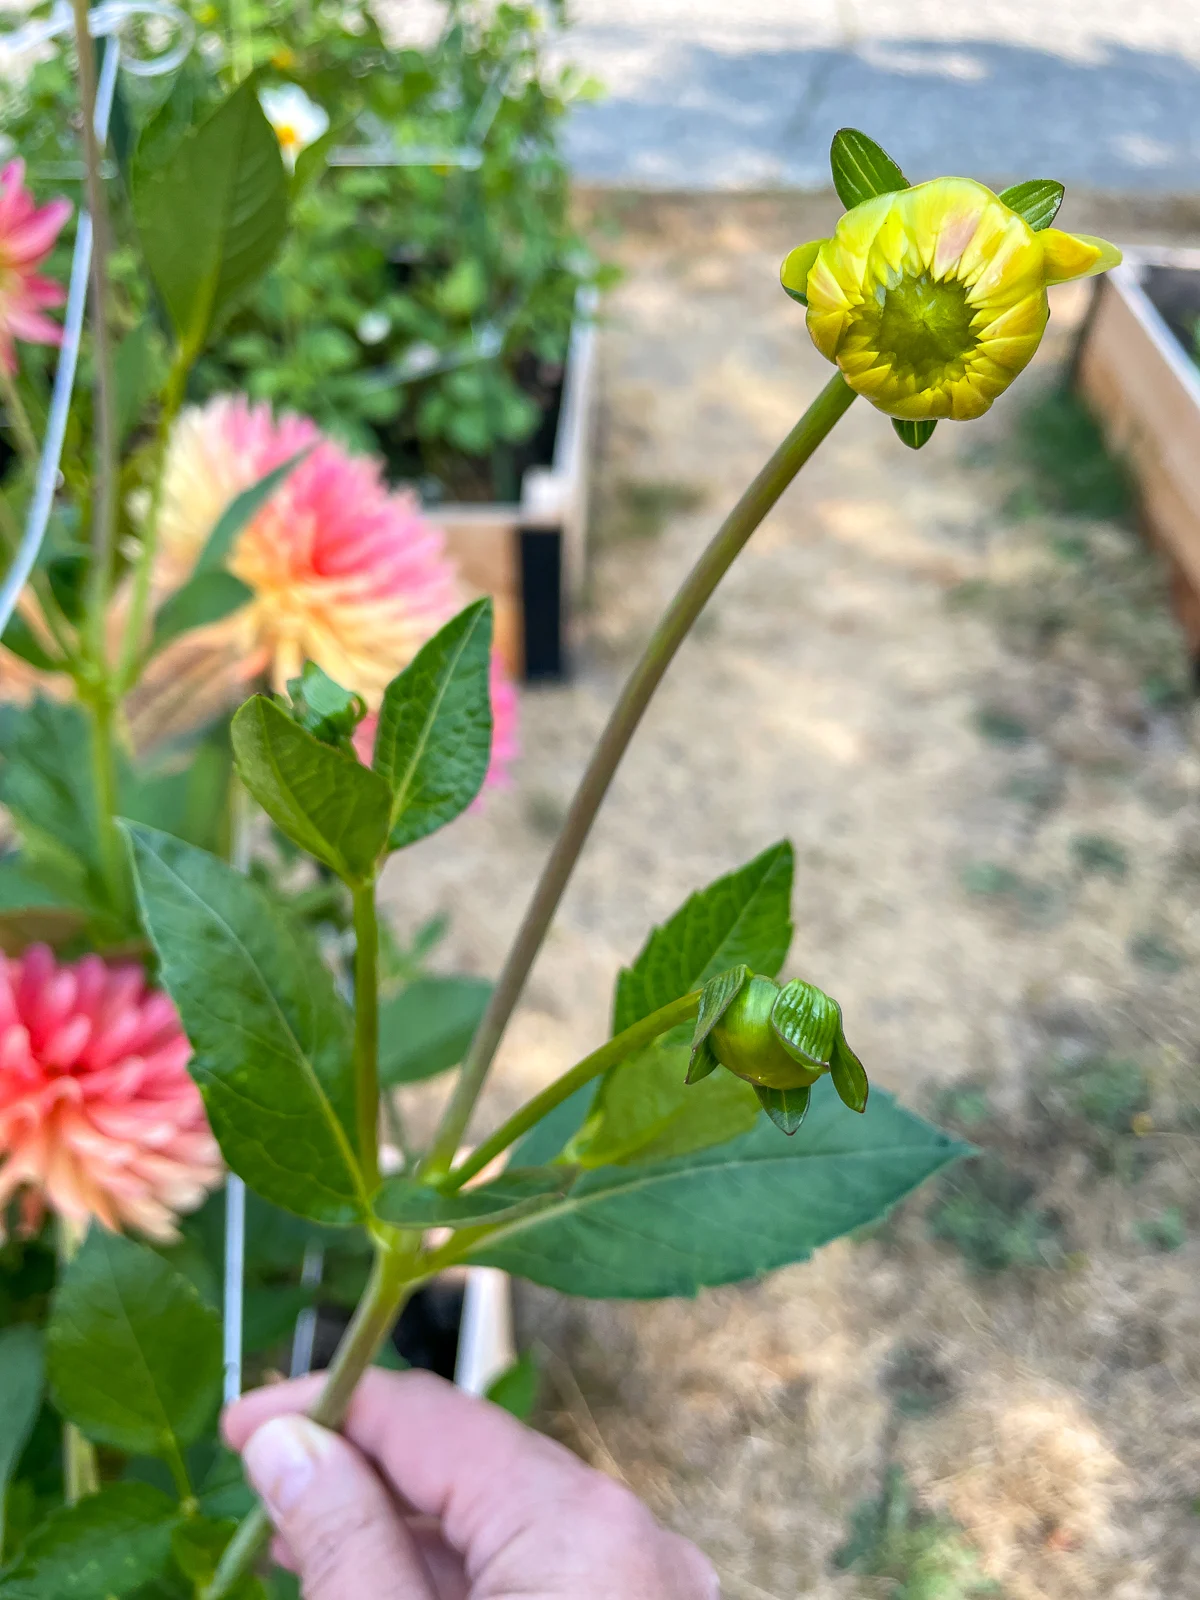 dahlia with one main flower and two side buds to be disbudded